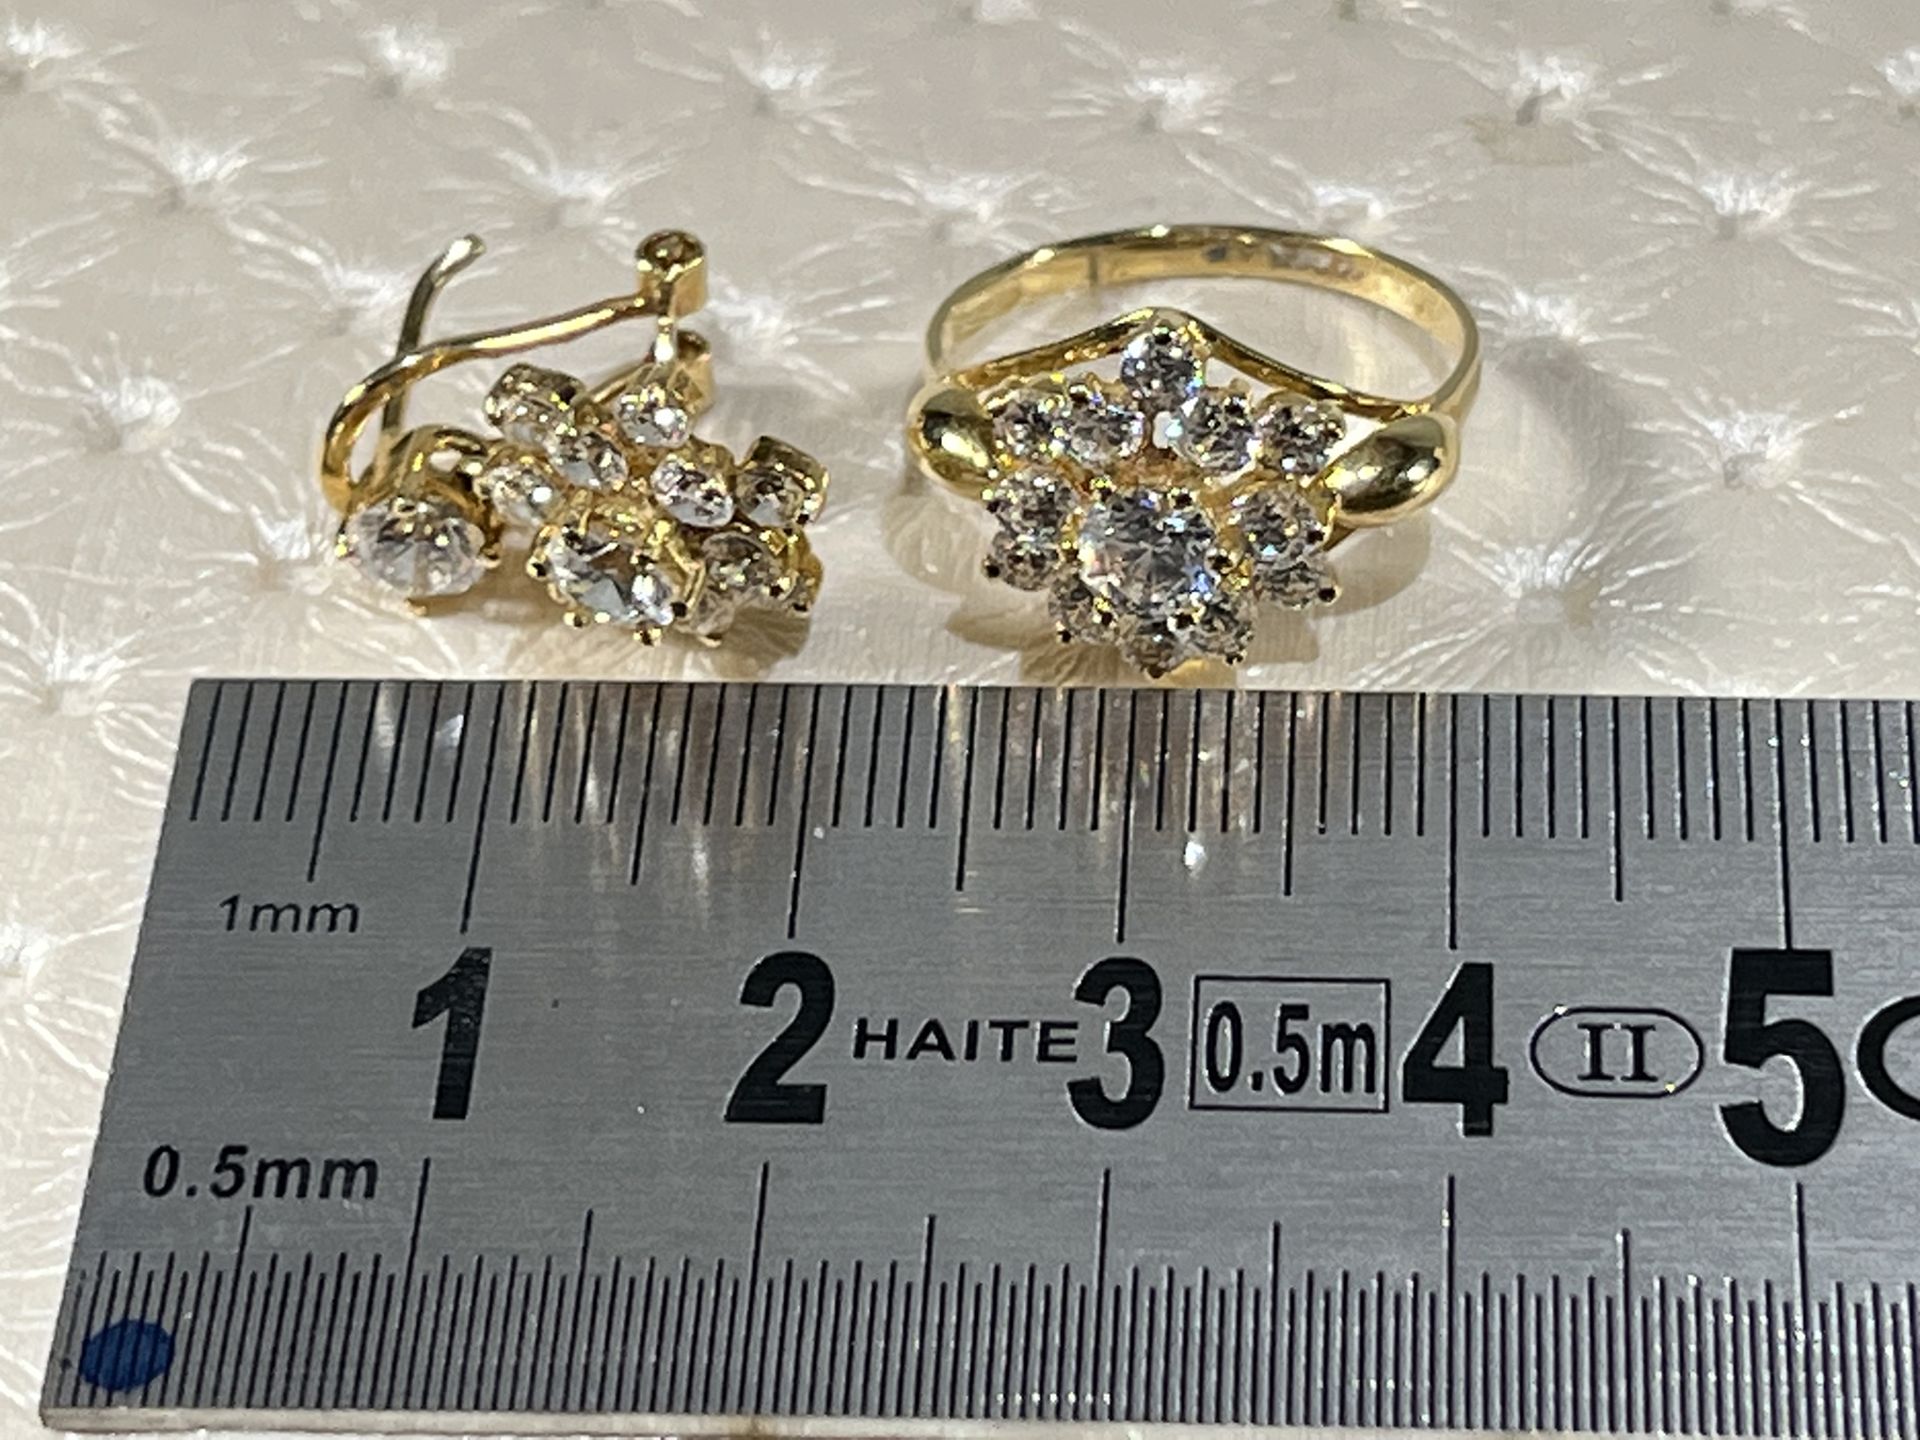 Set of earrings and ring 18k gold and zircons - Image 7 of 9